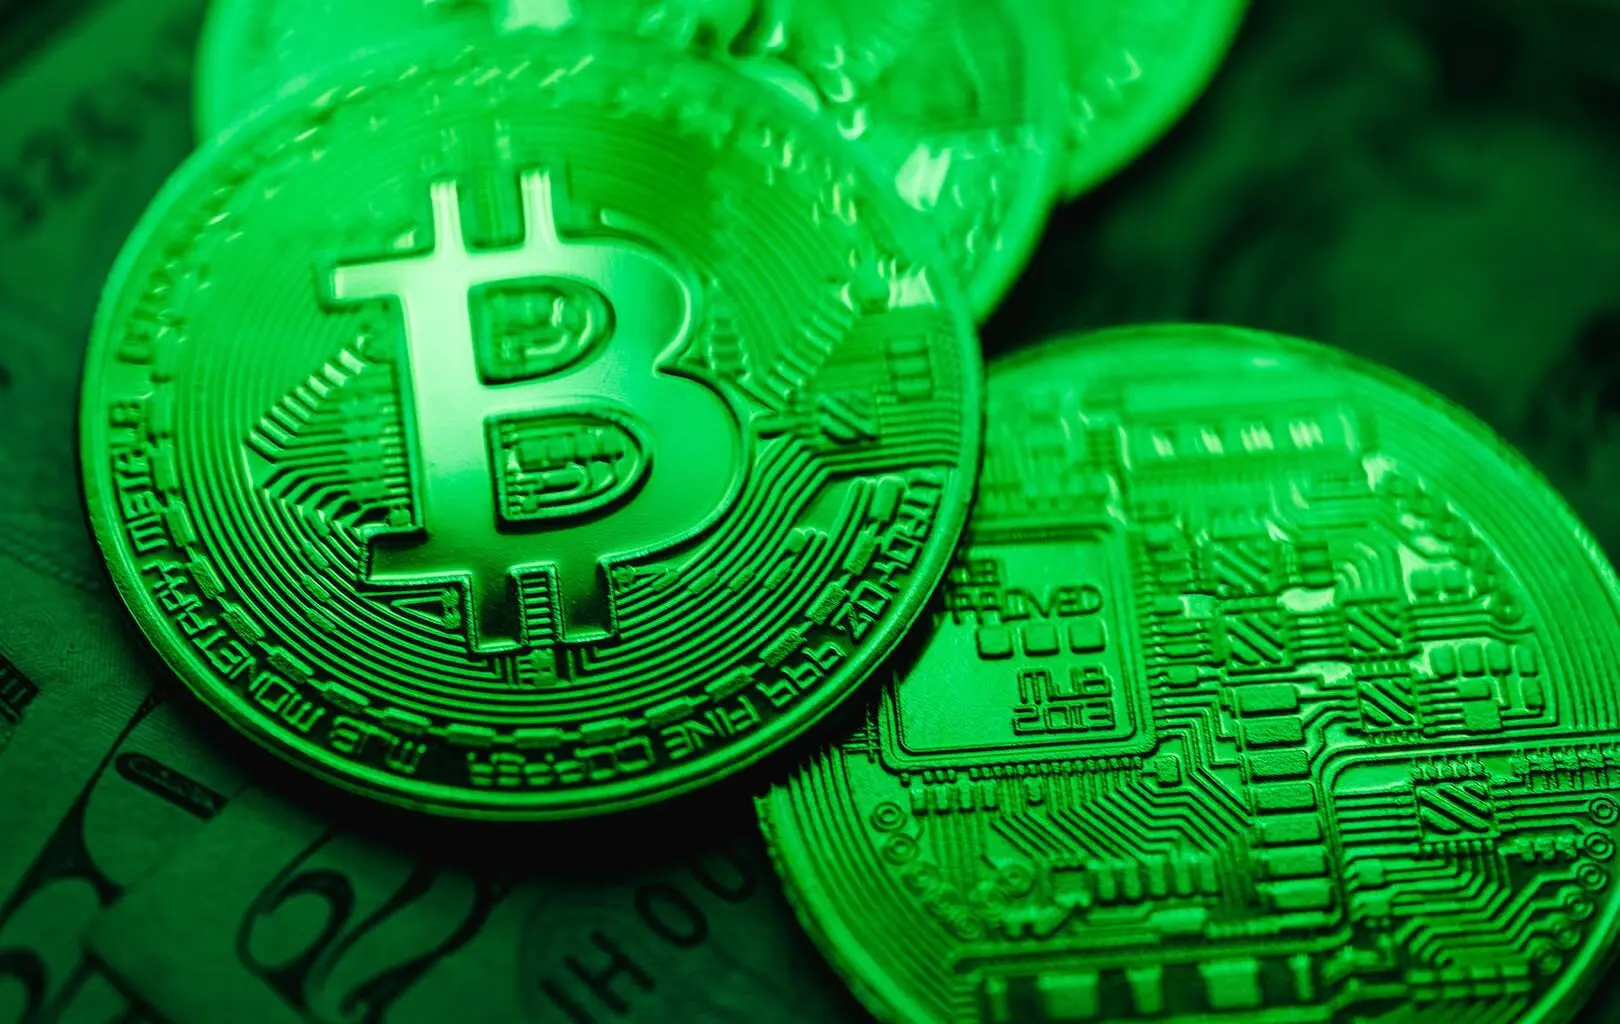 Gold-colored Bitcoin coins illuminated in green light, suggesting a theme of green crypto and greenwashing.